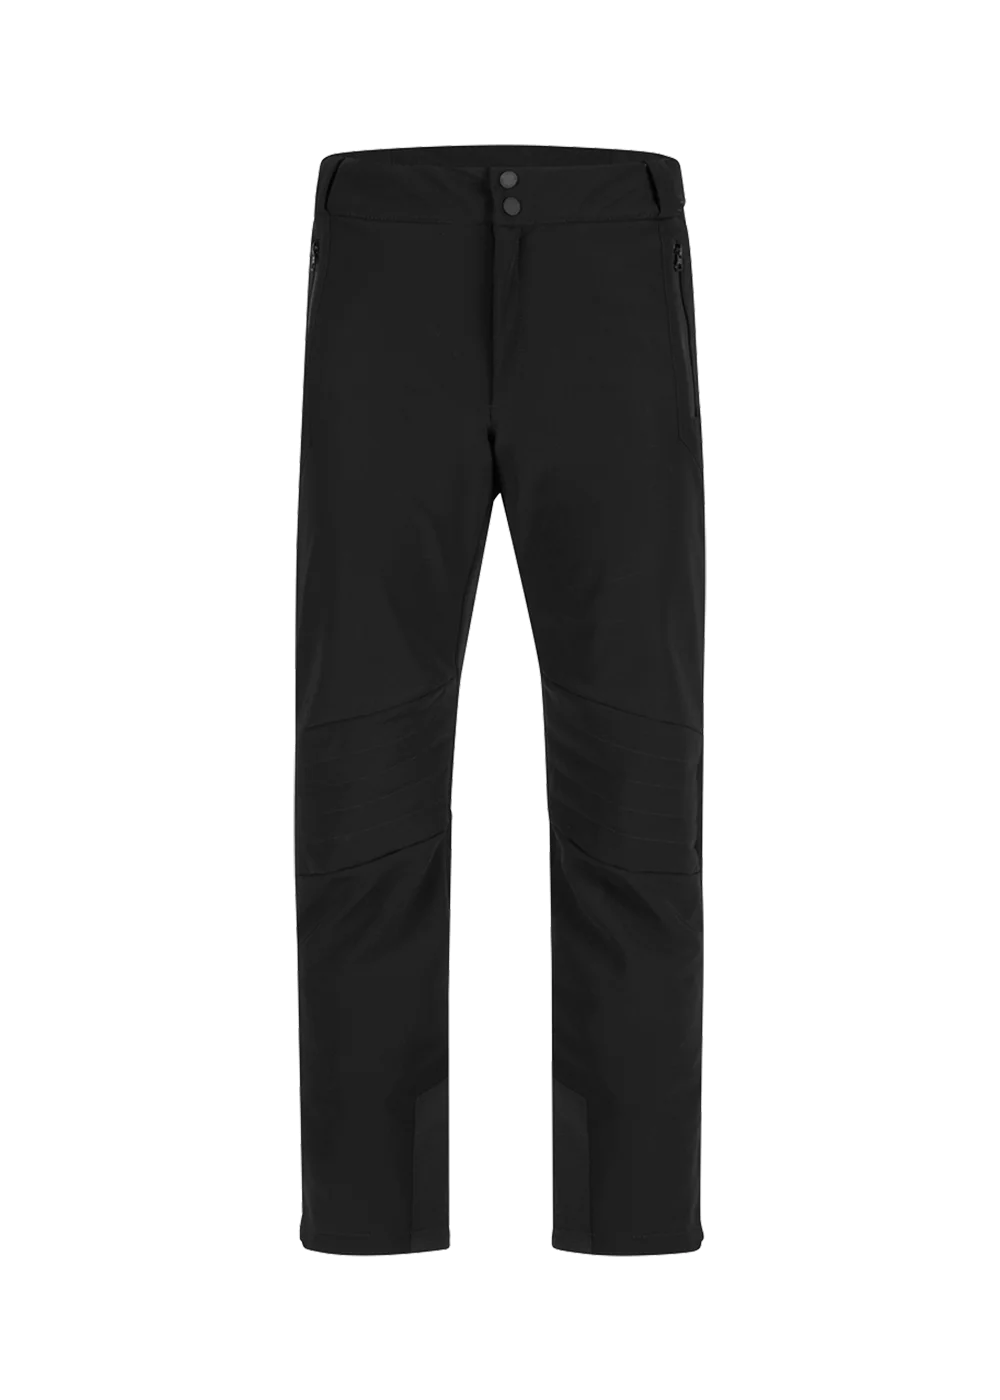 Onemore Pant 971-Softshell